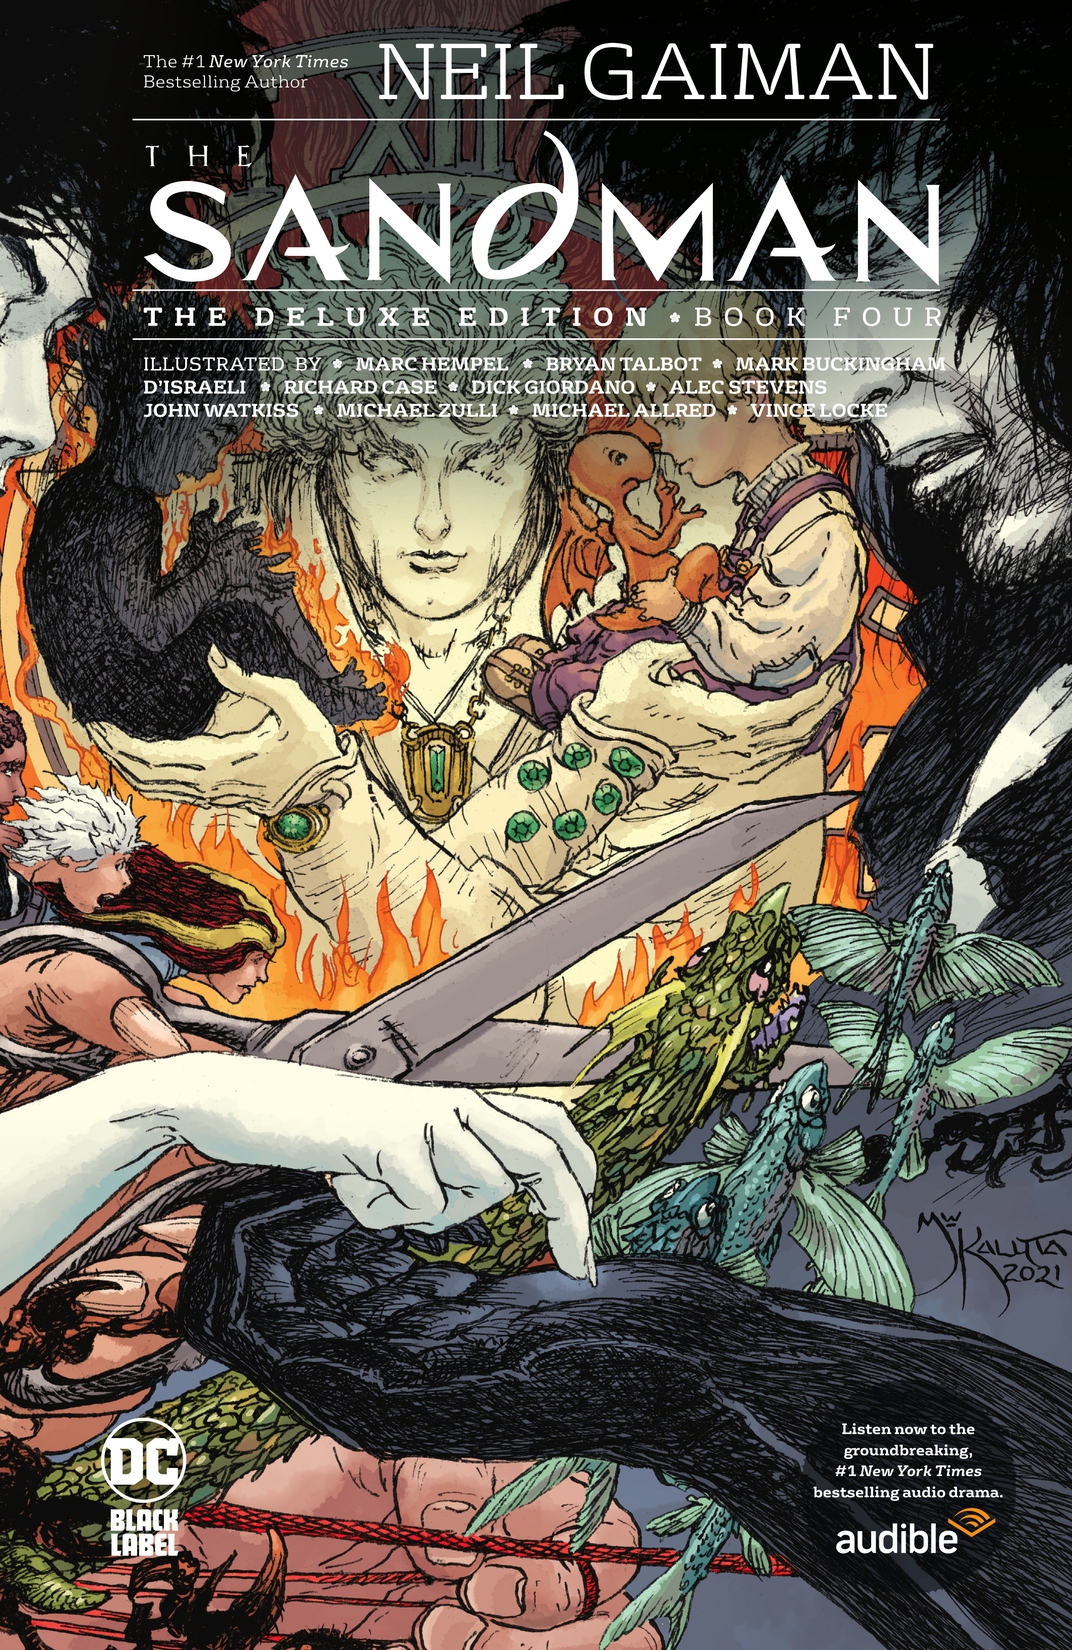 The Sandman: The Deluxe Edition Book Four preview images